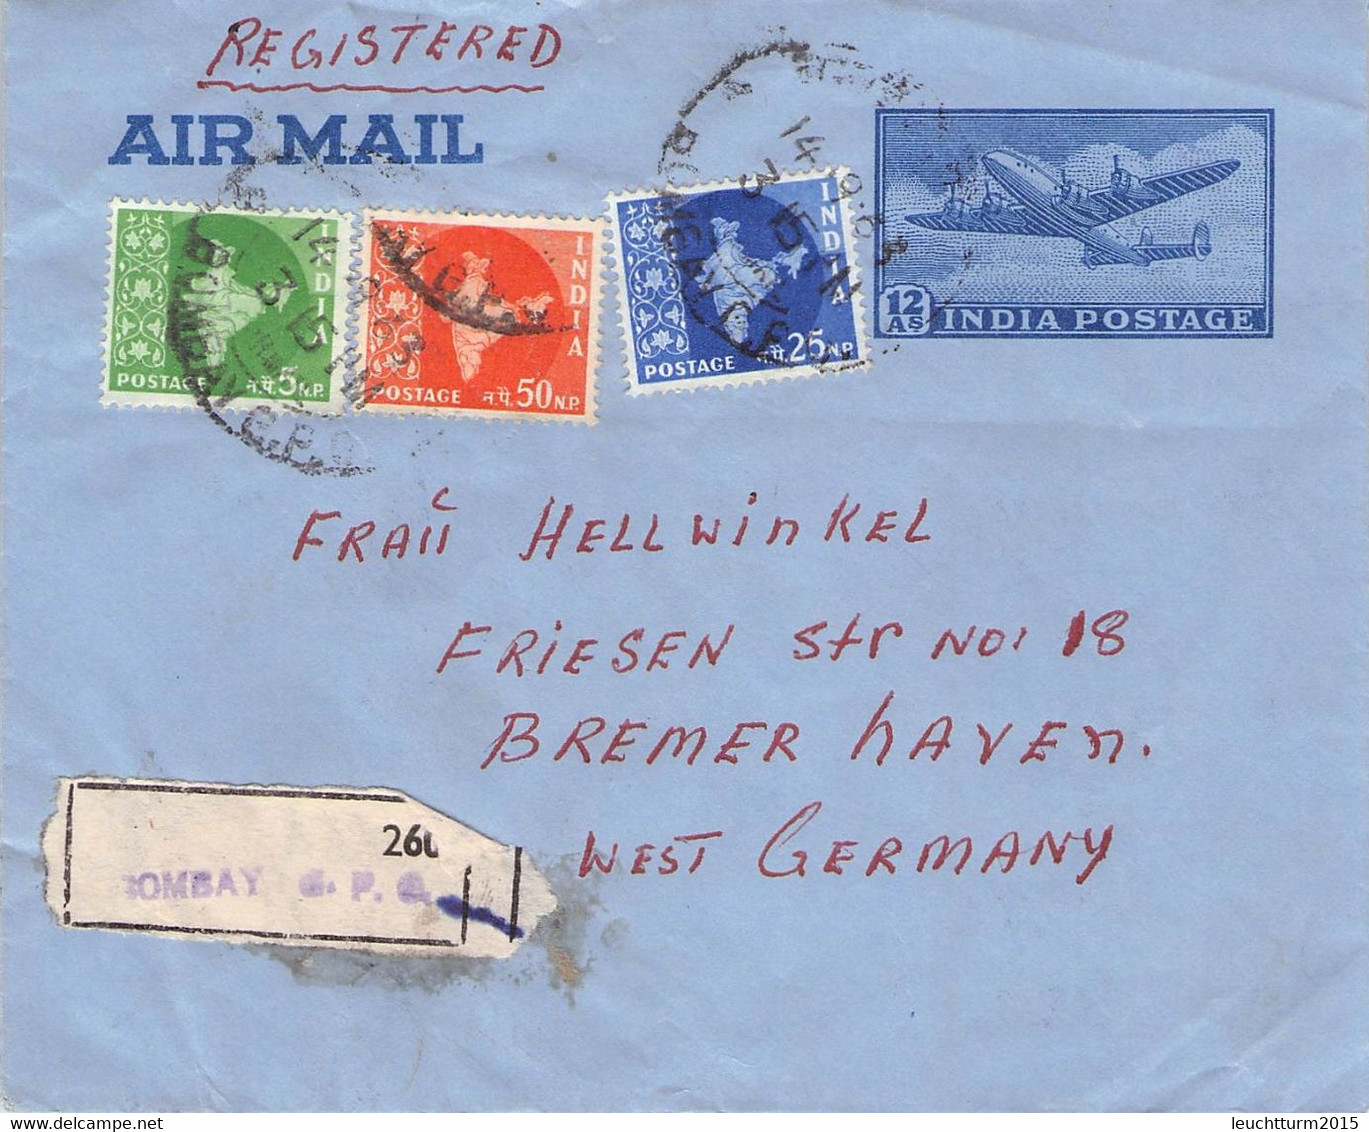 INDIA - AIRMAIL 1963 BOMBAY > BREMERHAVEN/GEERMANY /G114 - Corréo Aéreo